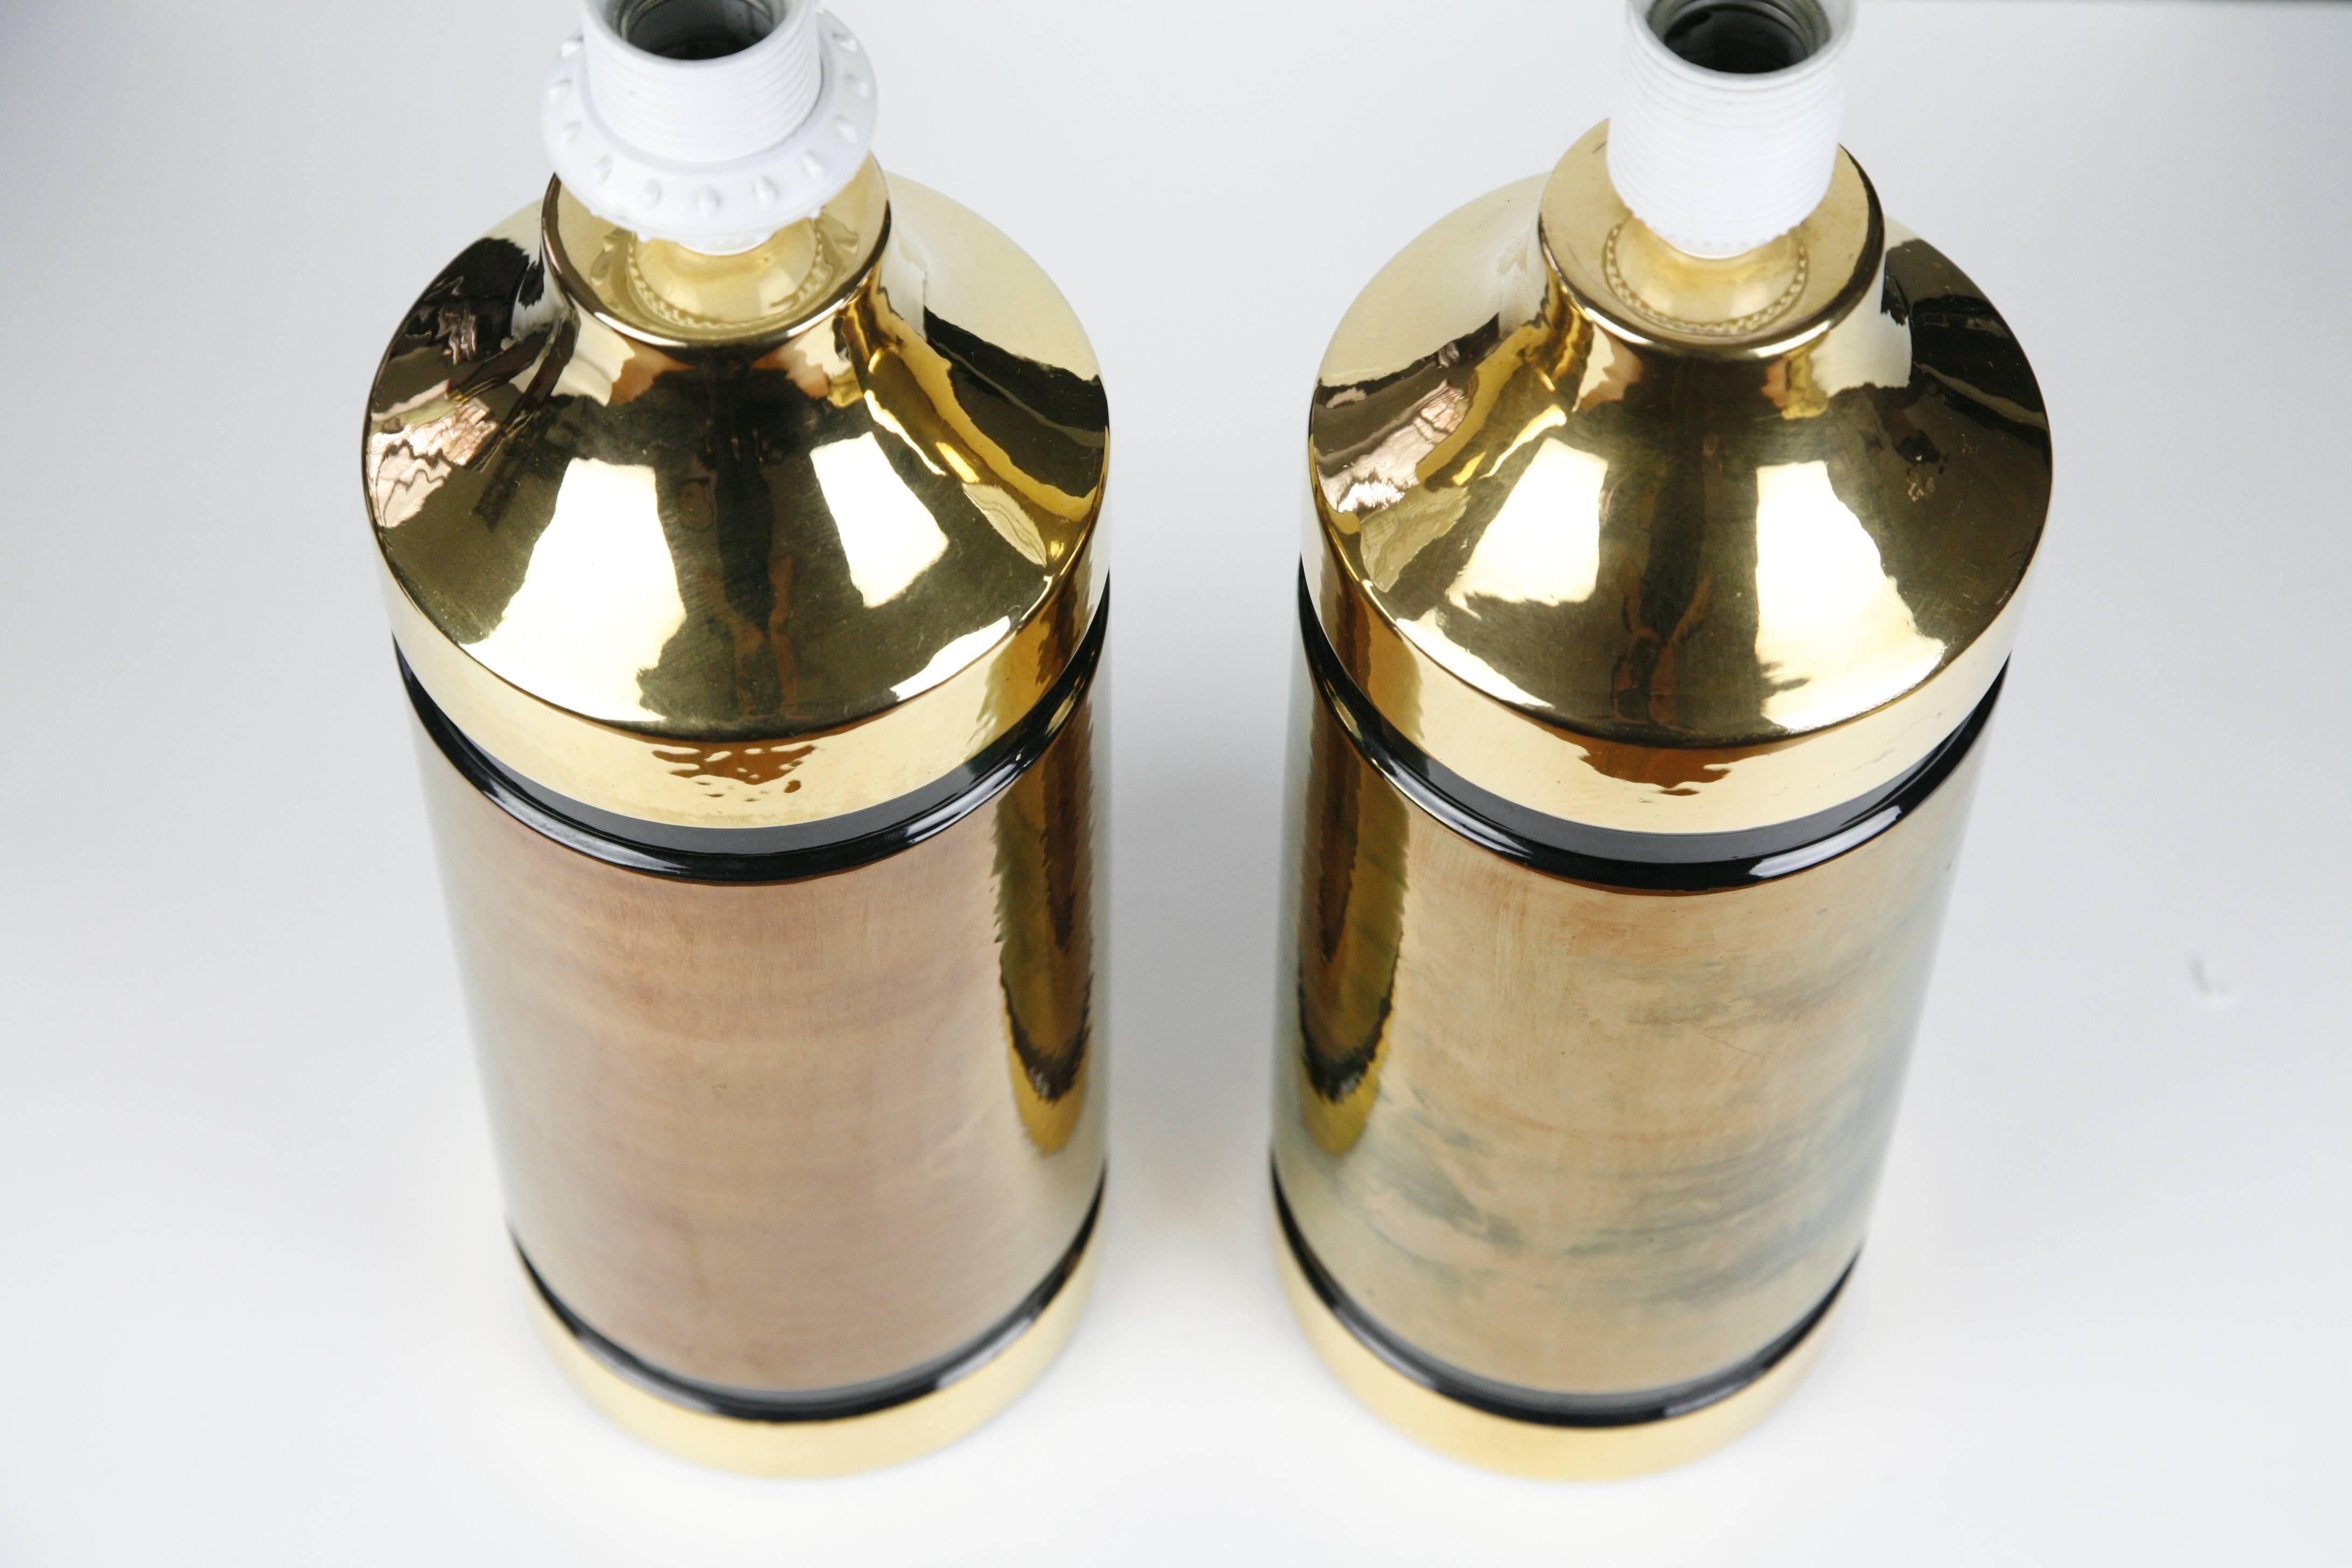 20th Century Pair of Ceramic Bitossi Lamps Gold, Black and Copper, 1960, Italy For Sale